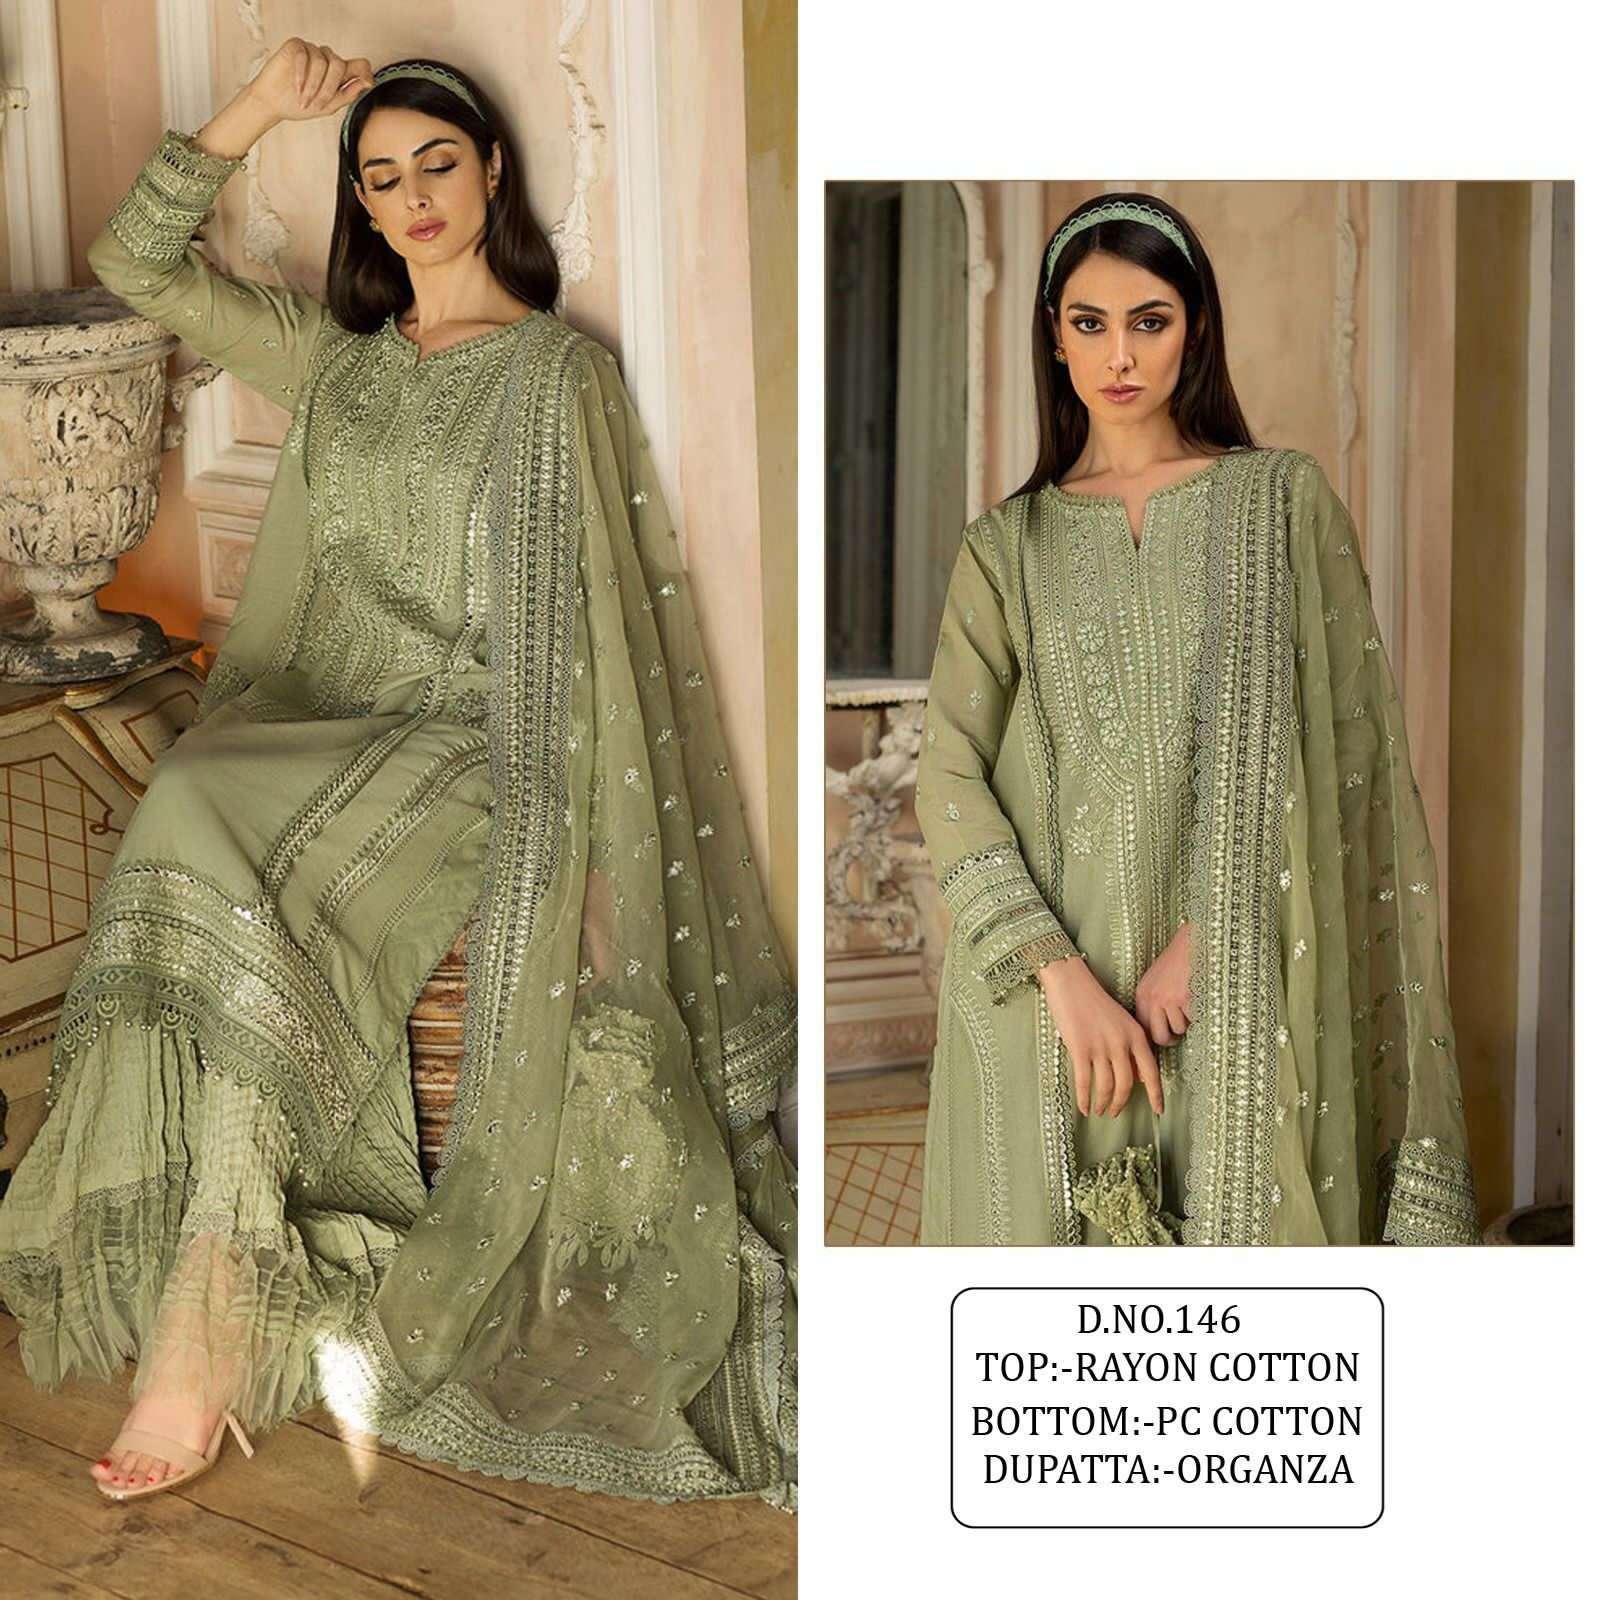 pakistani design number kf 146 designer heavy embroidery partywear pakistani suit top rayon cotton with embroidery work sleeave rayon cotton with embroidery work with dupatta  